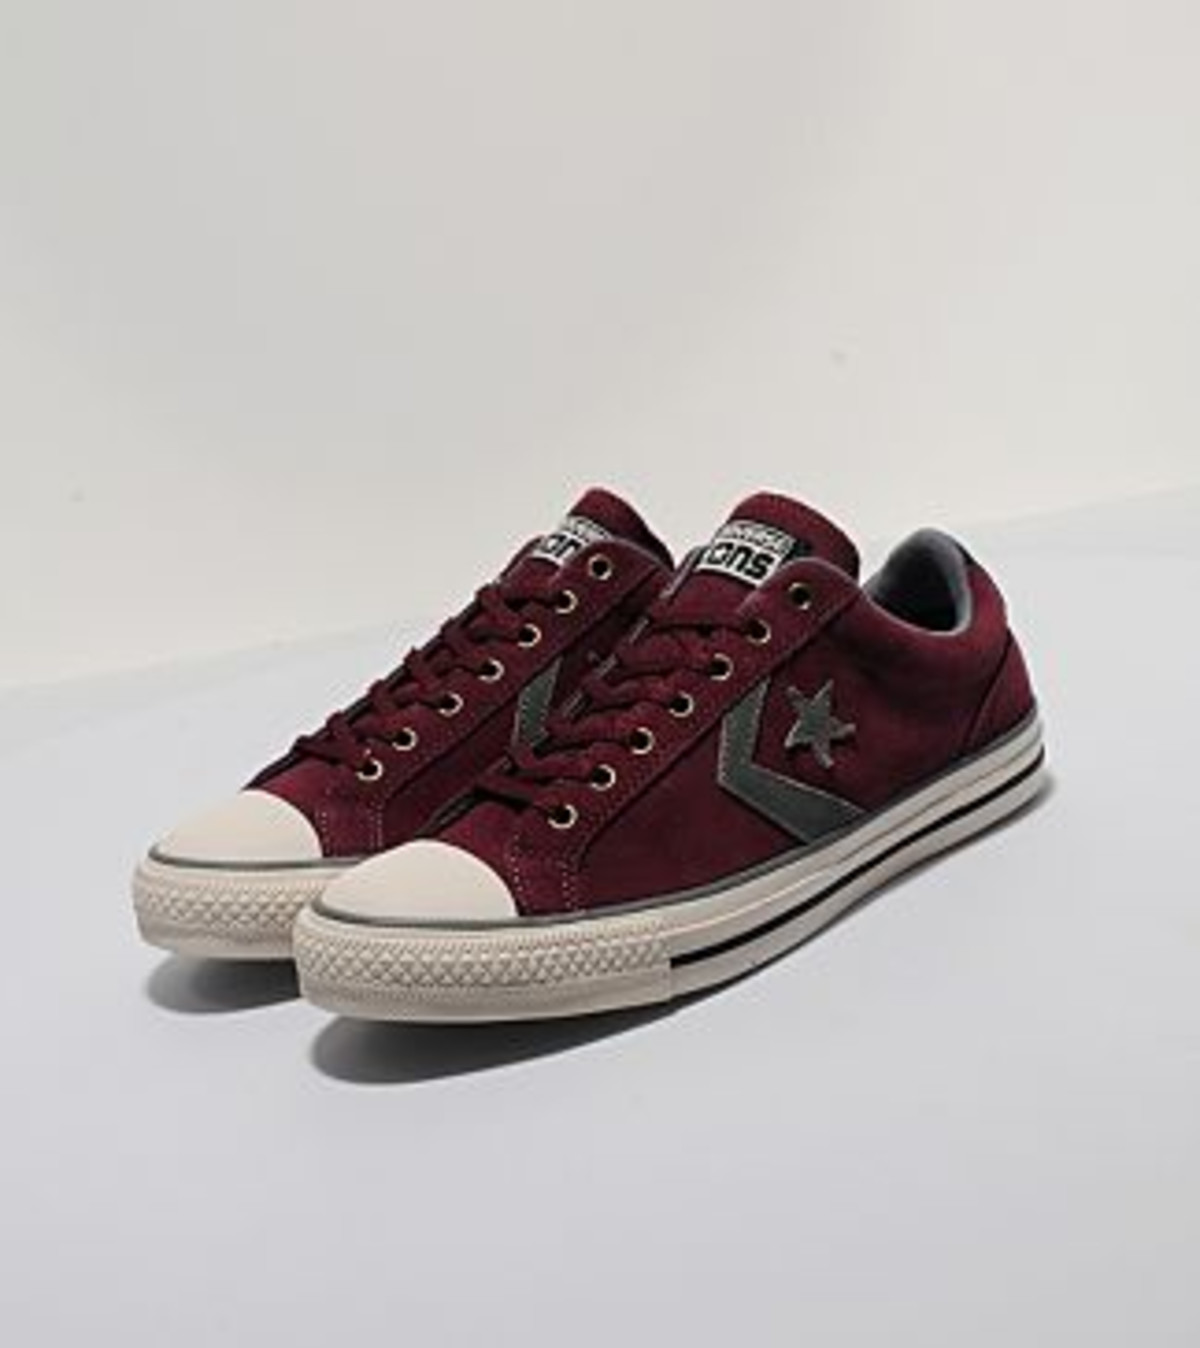 Converse Star Player Ox “Burgundy/Charcoal” | Complex